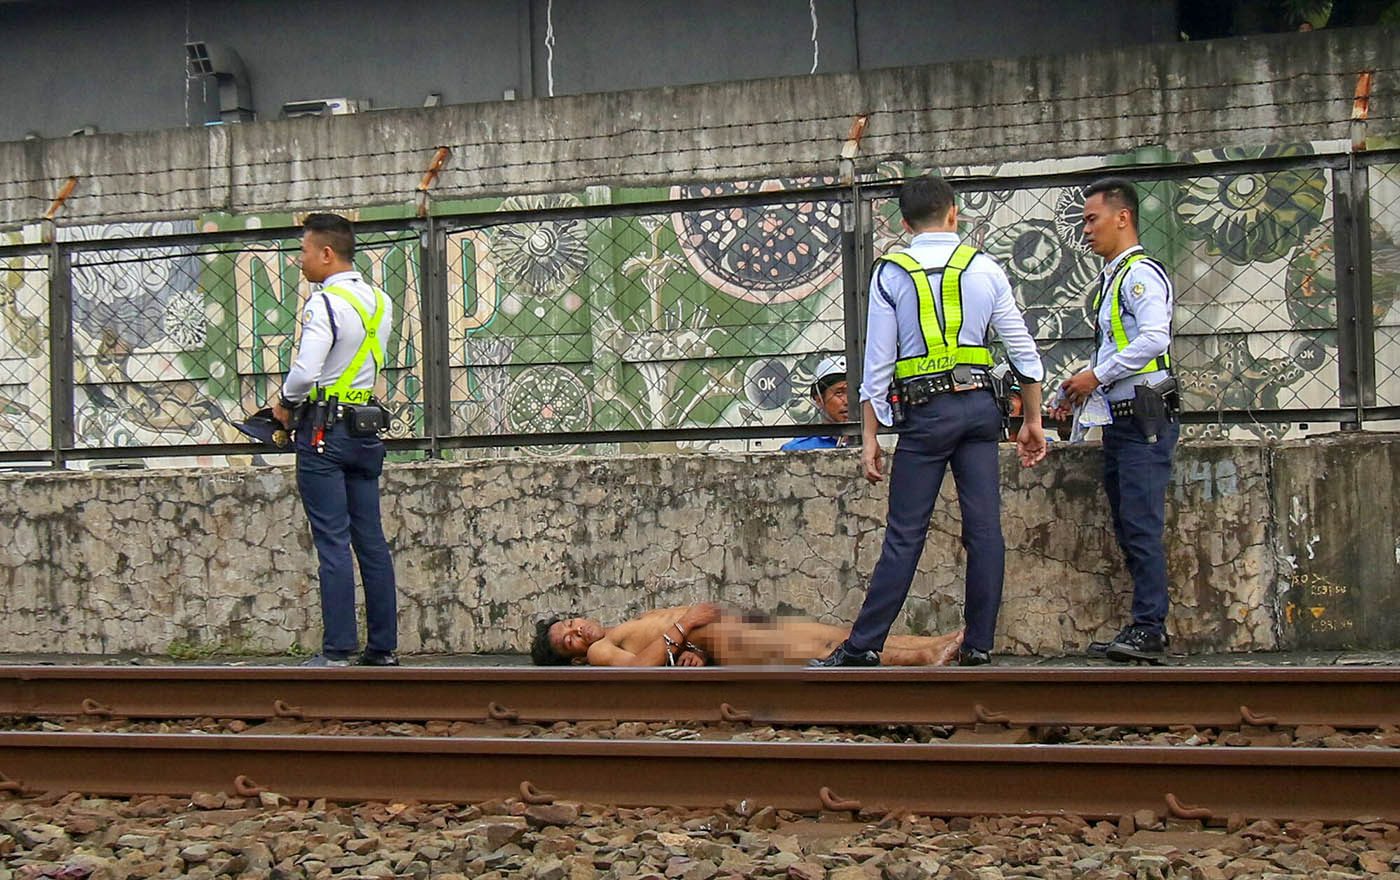 Vagrant shot in ankle by MRT3 guard